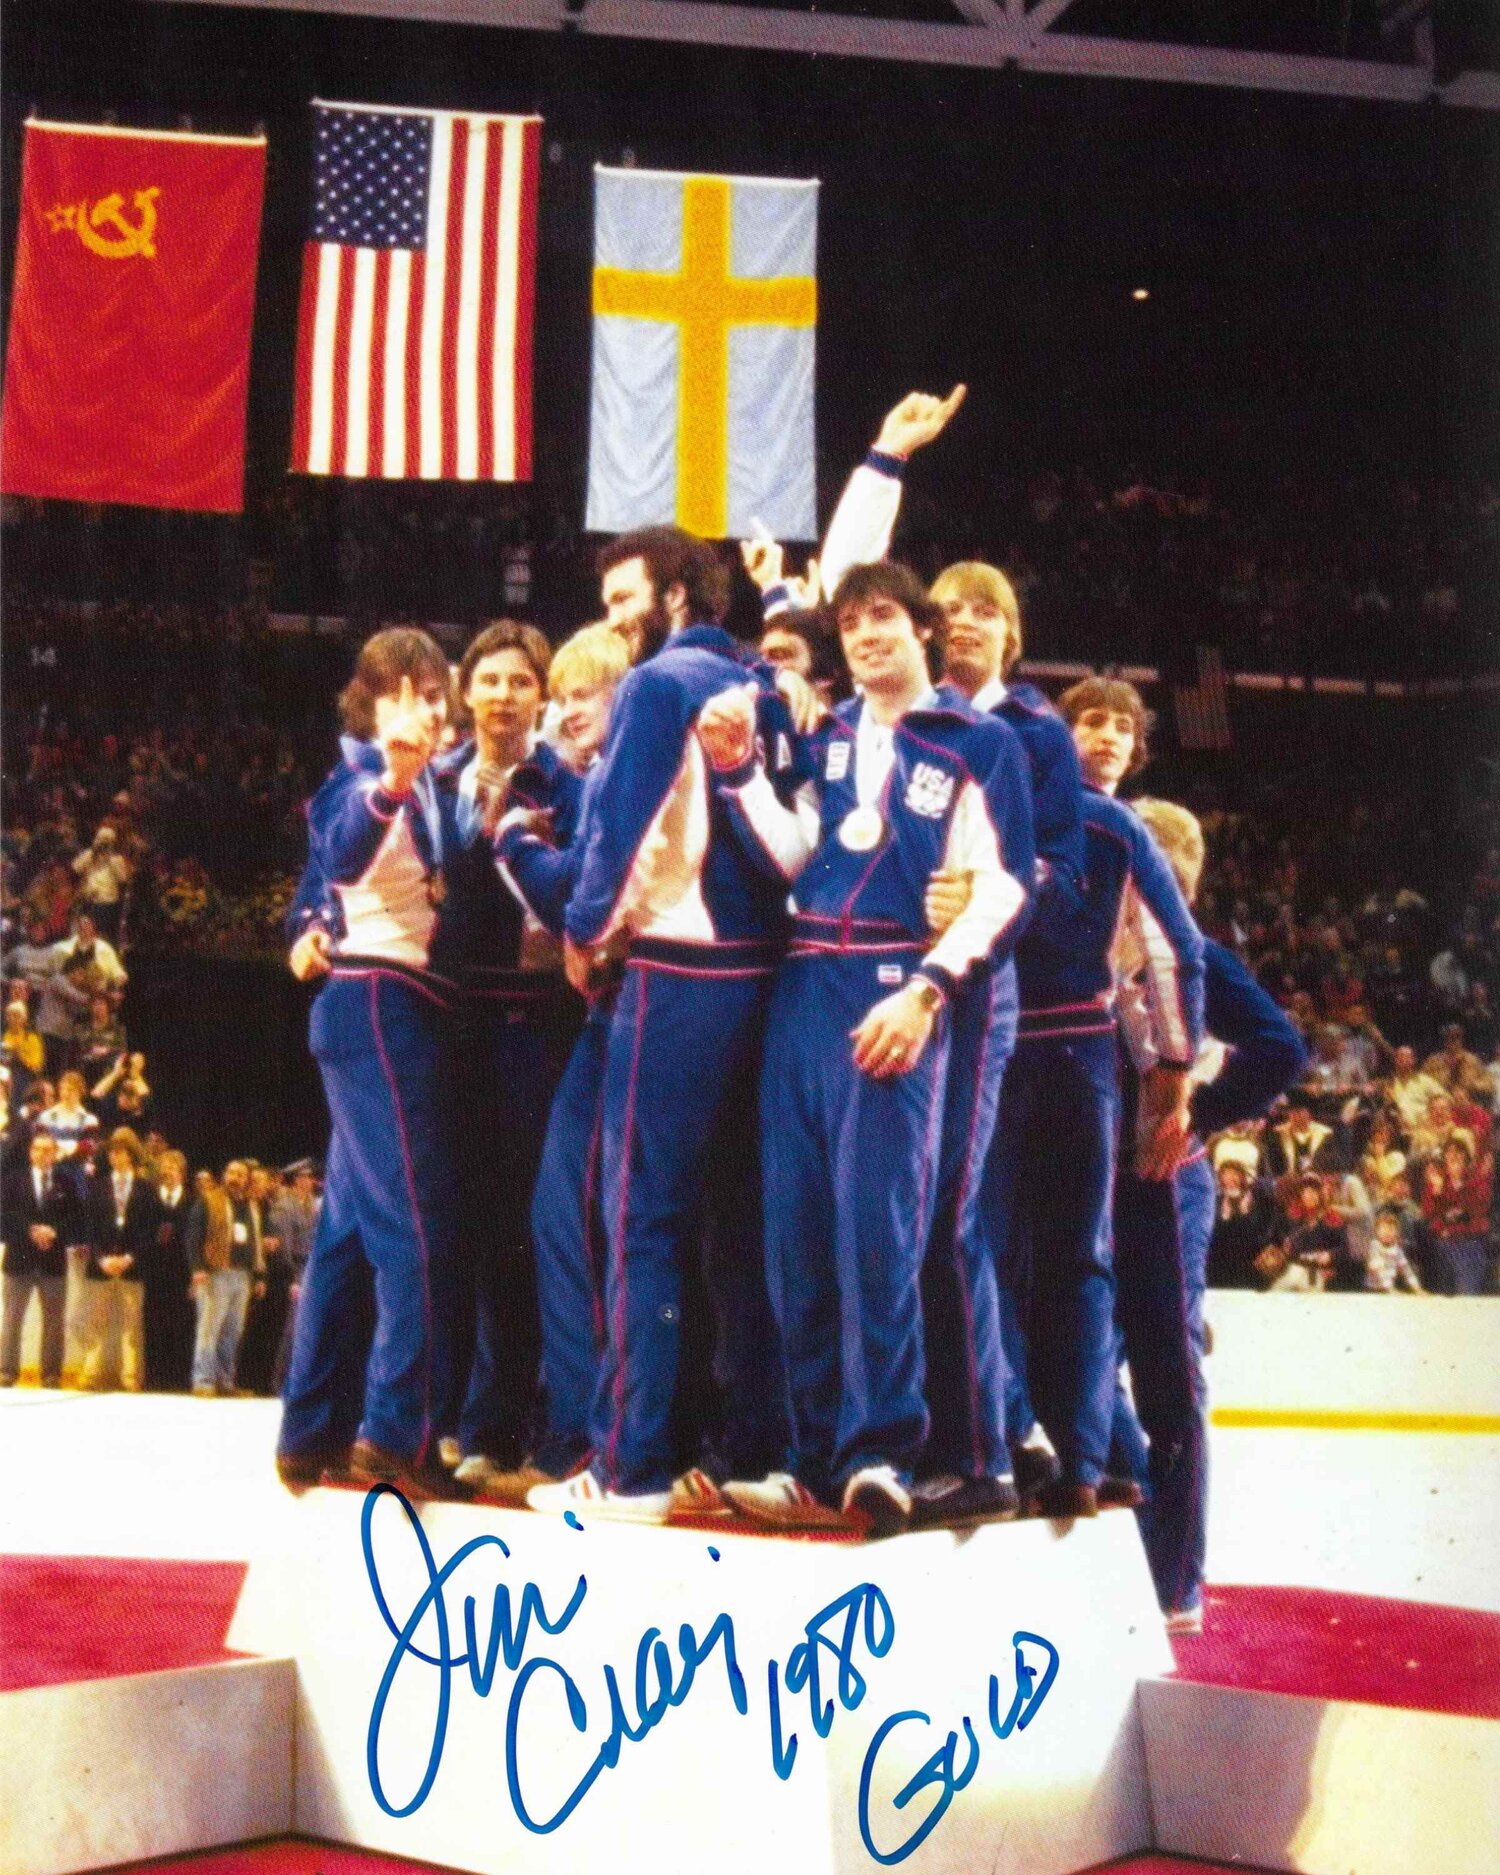 Jim Craig Autographed 1980 USA Hockey Deluxe Framed 8x10 Photo w